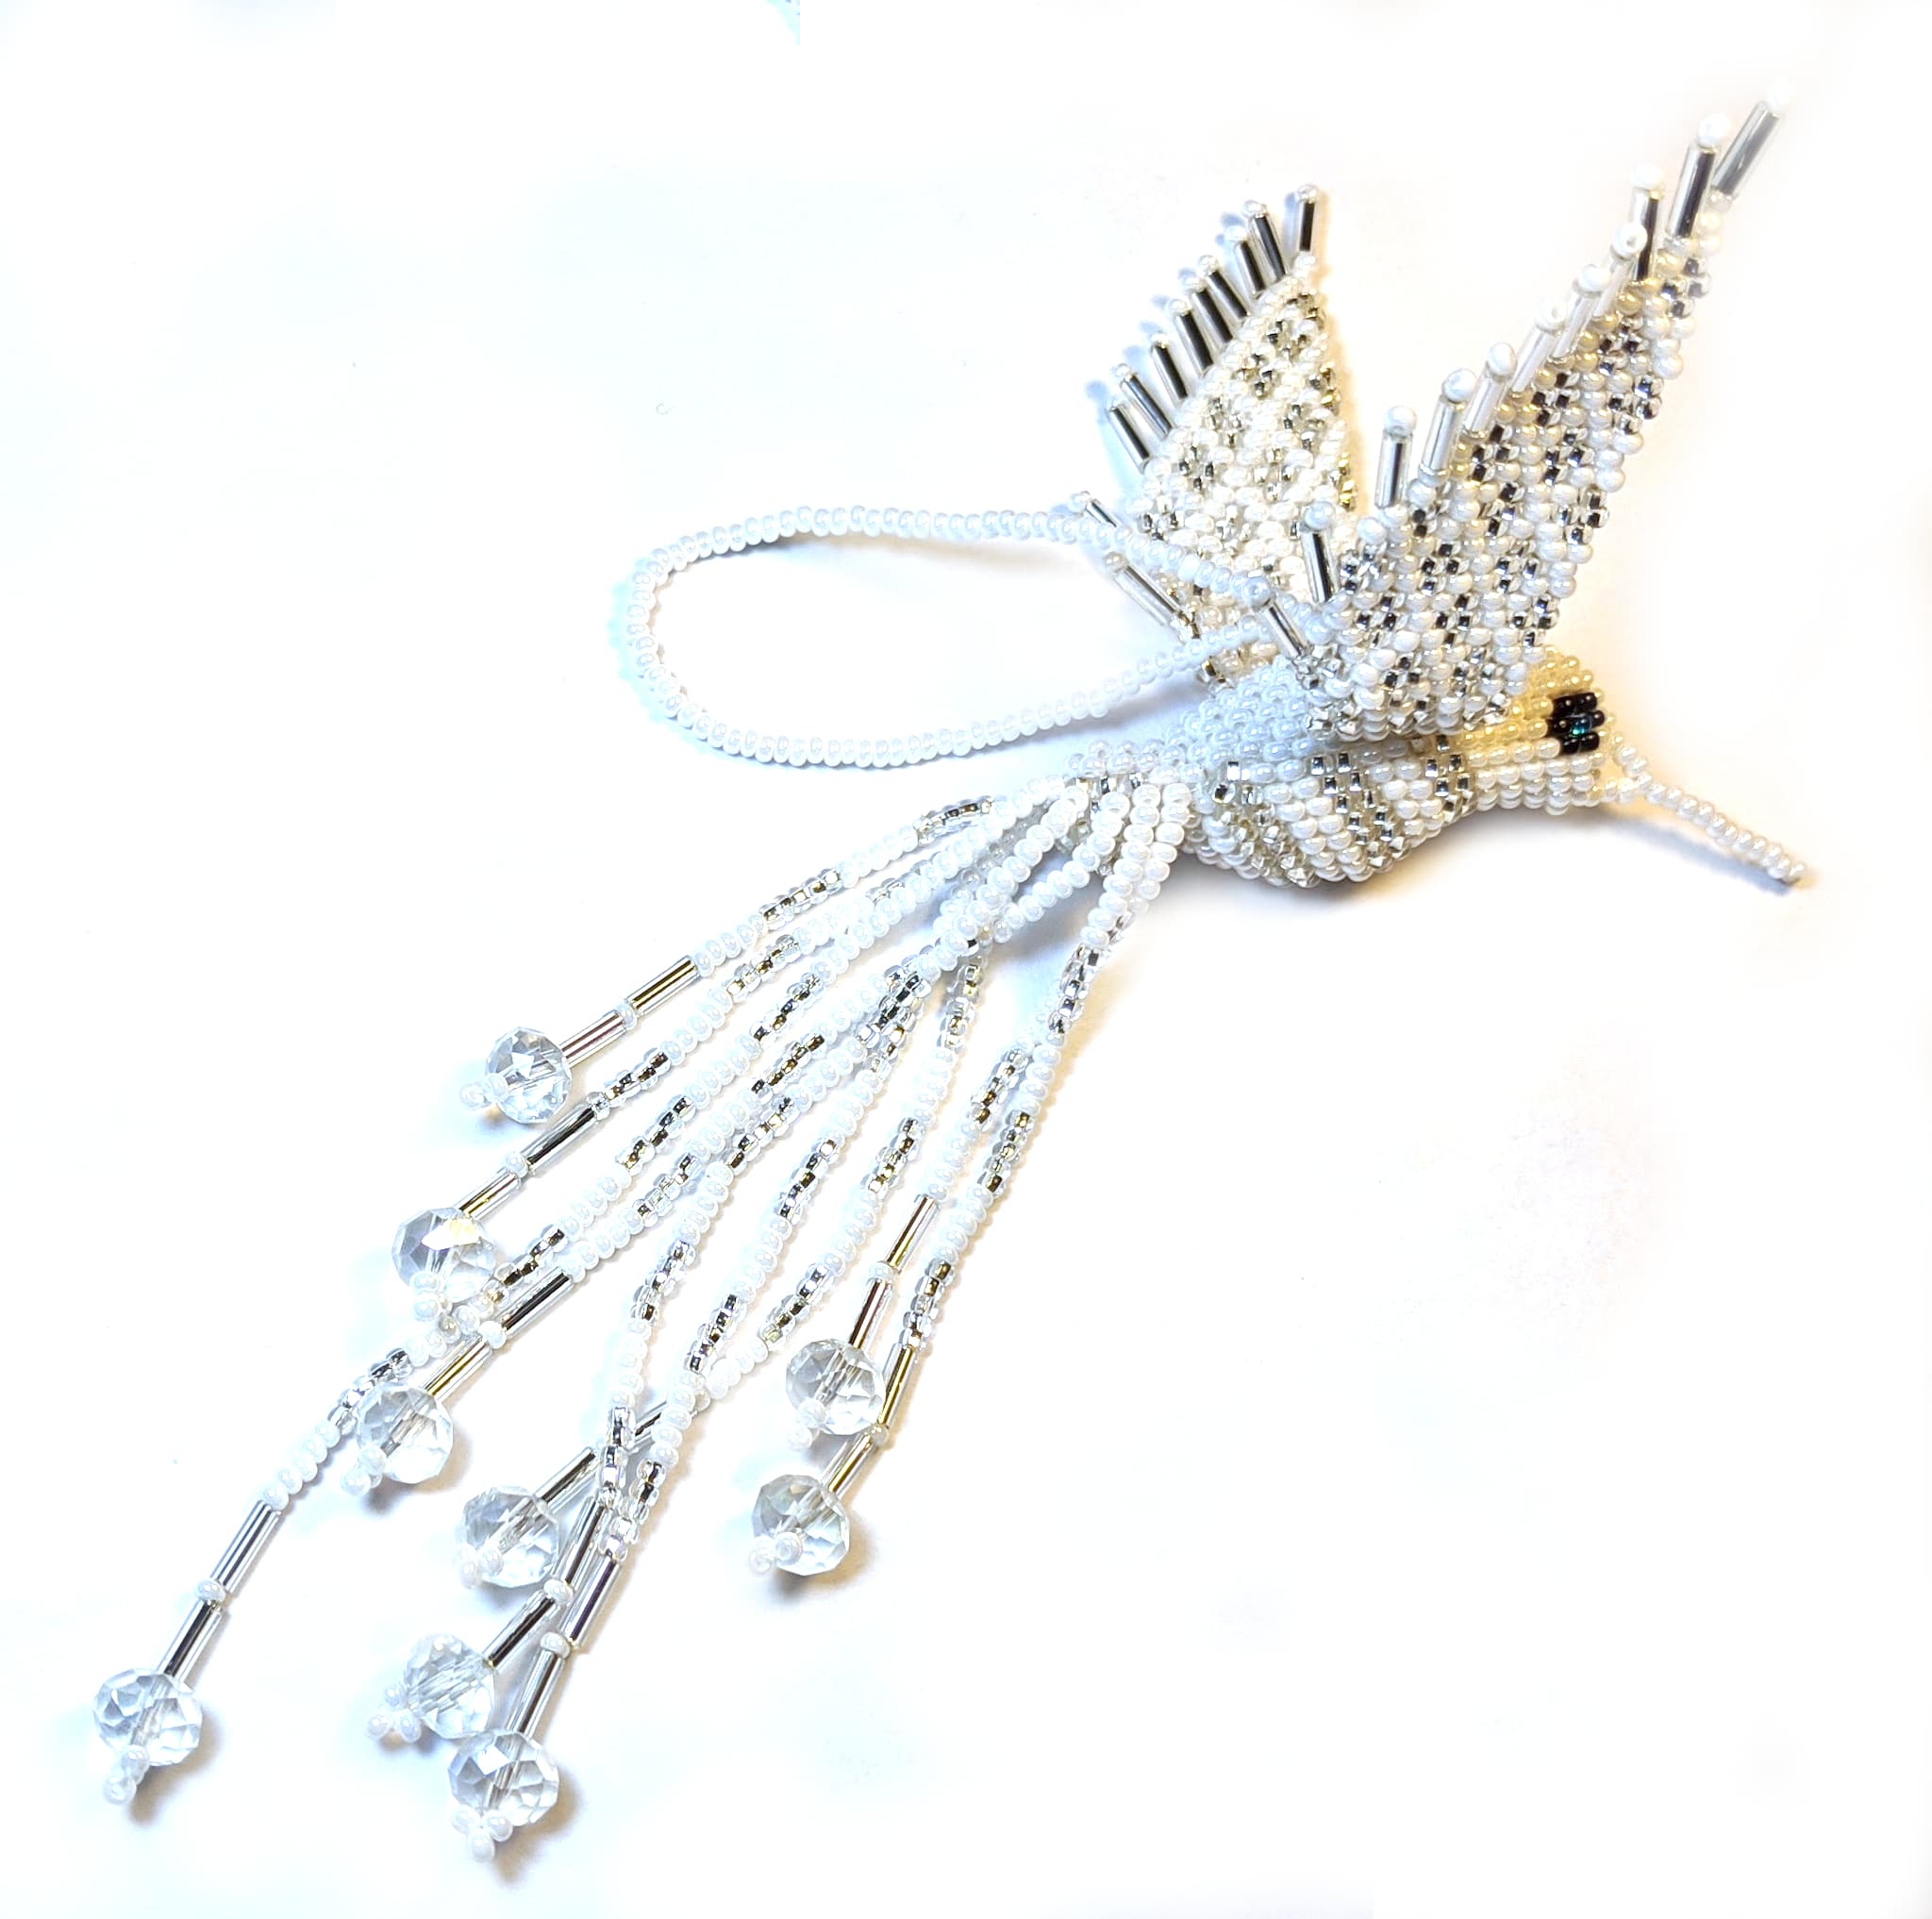 Hummingbird Beaded Ornament - Silver White and Opaque White